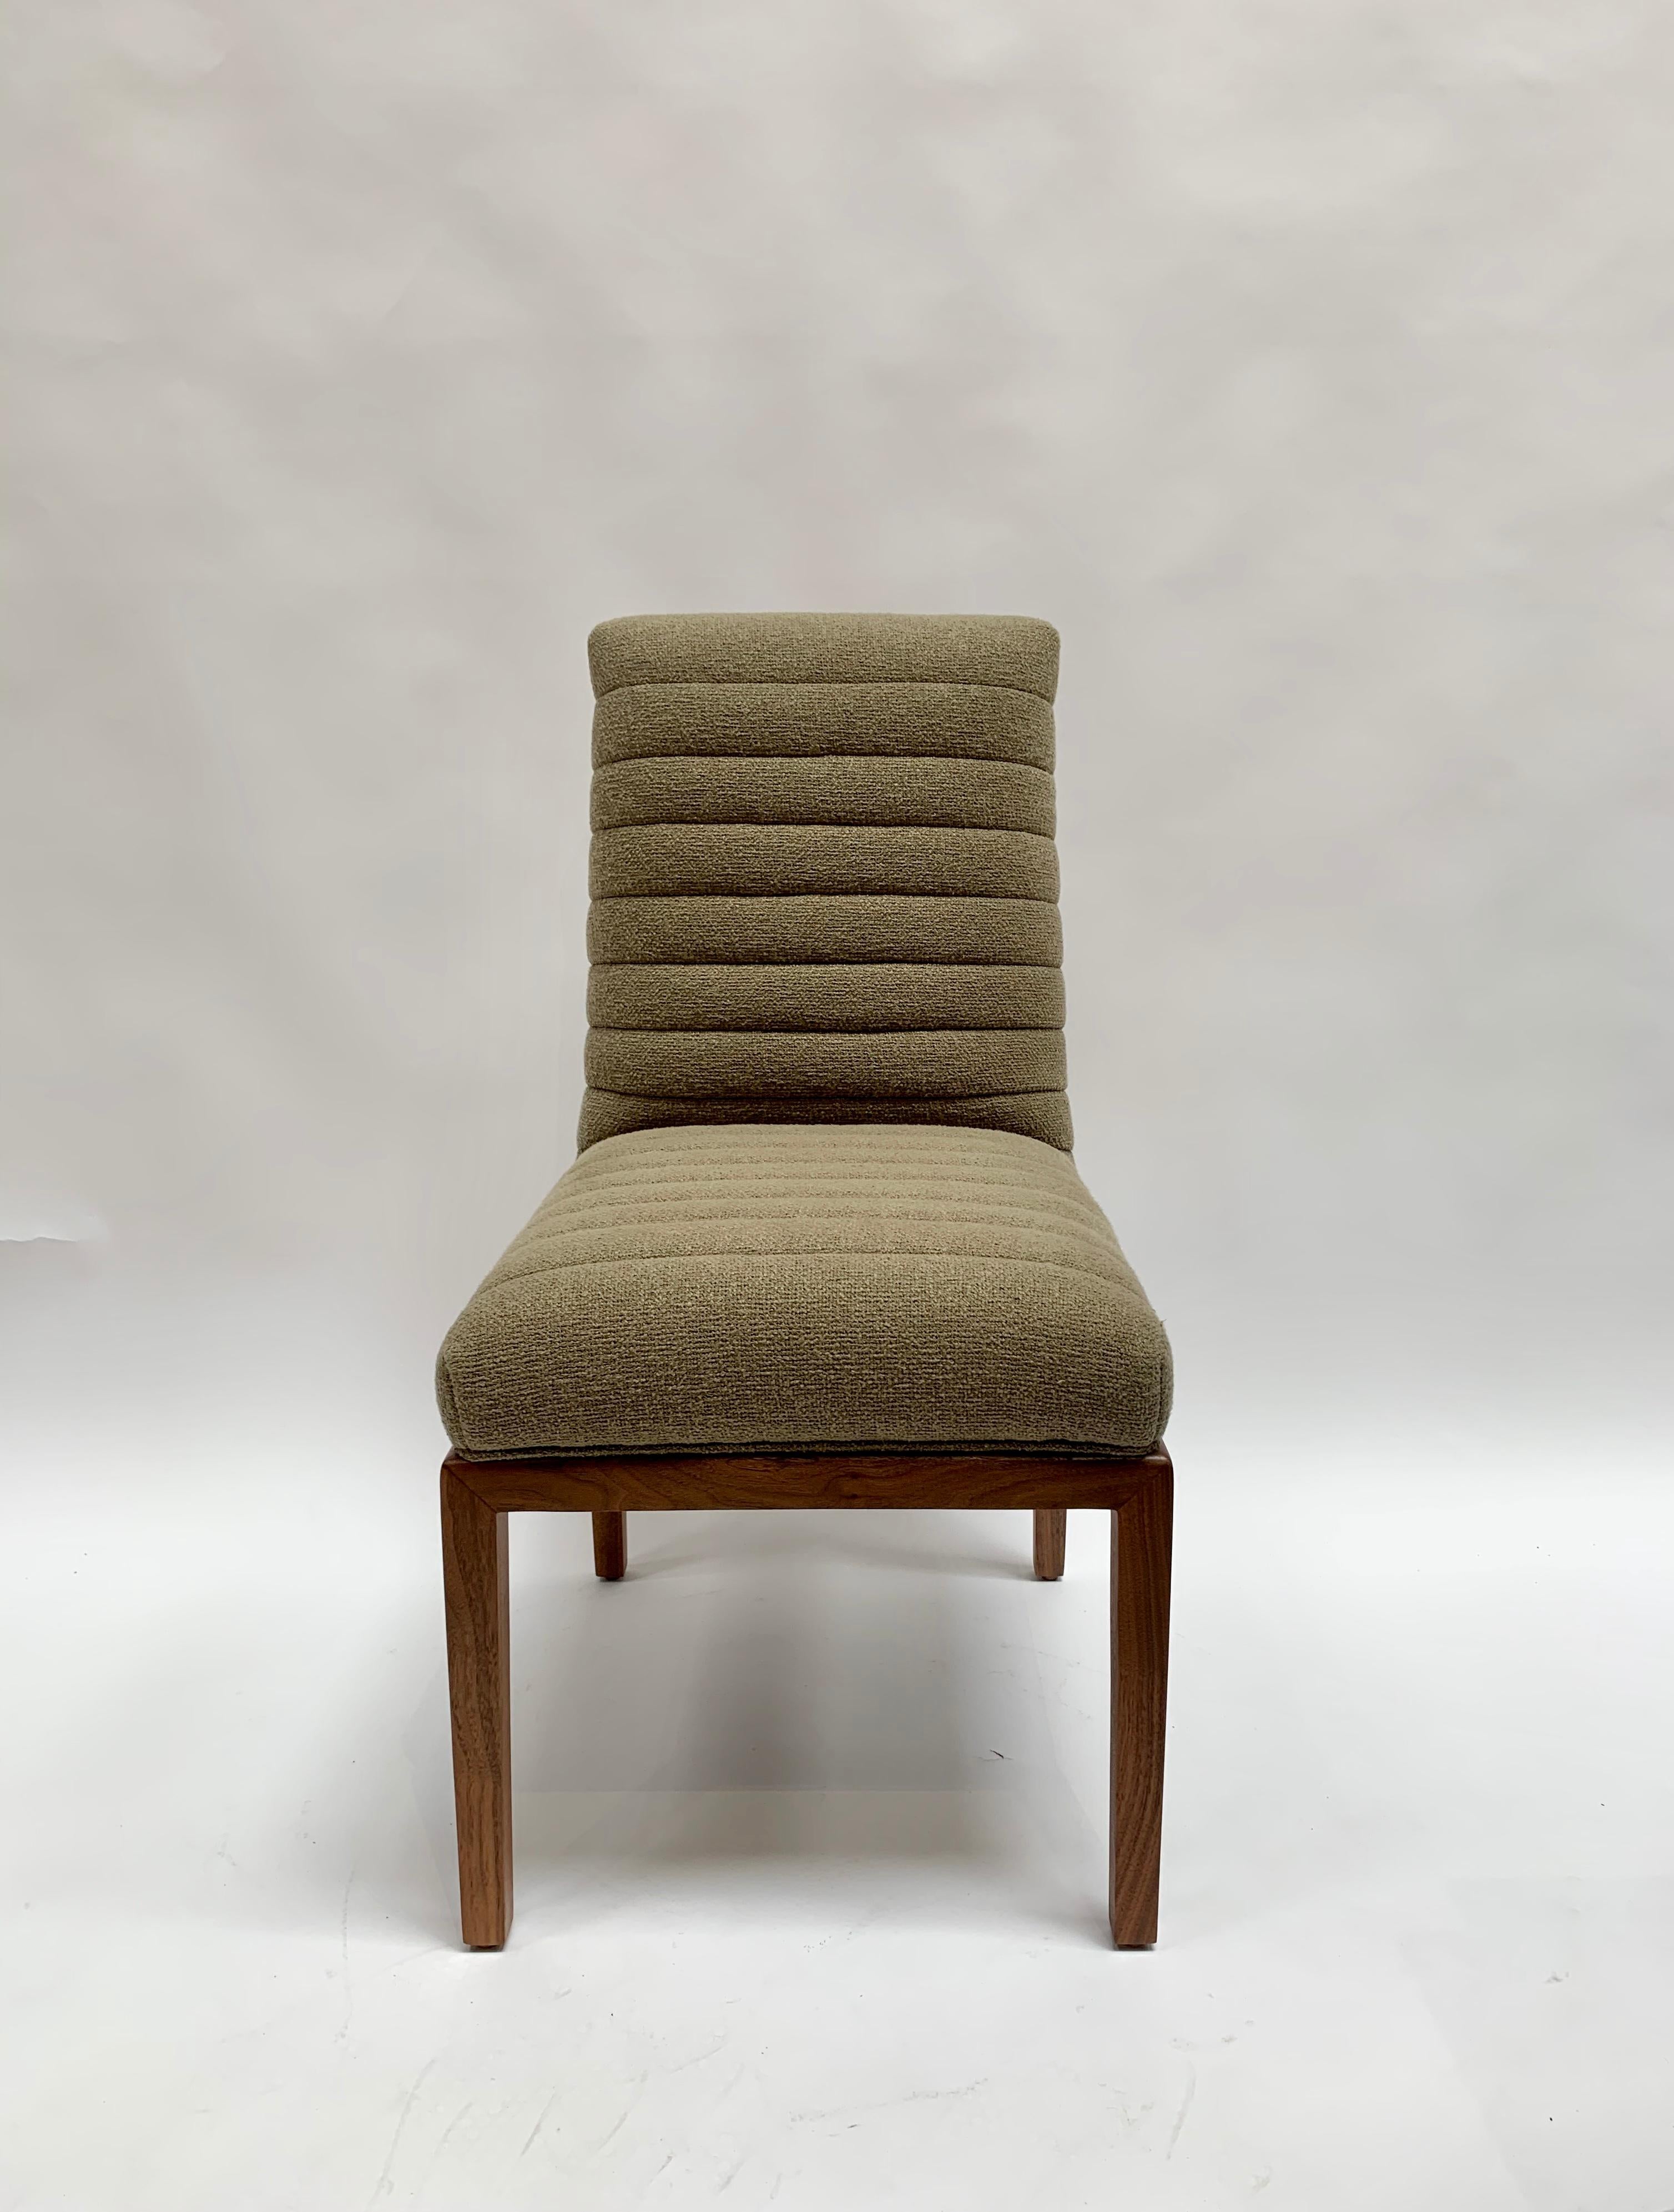 The Highback Shoreland chair is part of the collaborative collection with interior designer Brian Paquette. The dining chair features a channel tufted back and seat with a solid American walnut or white oak frame. This piece is available in